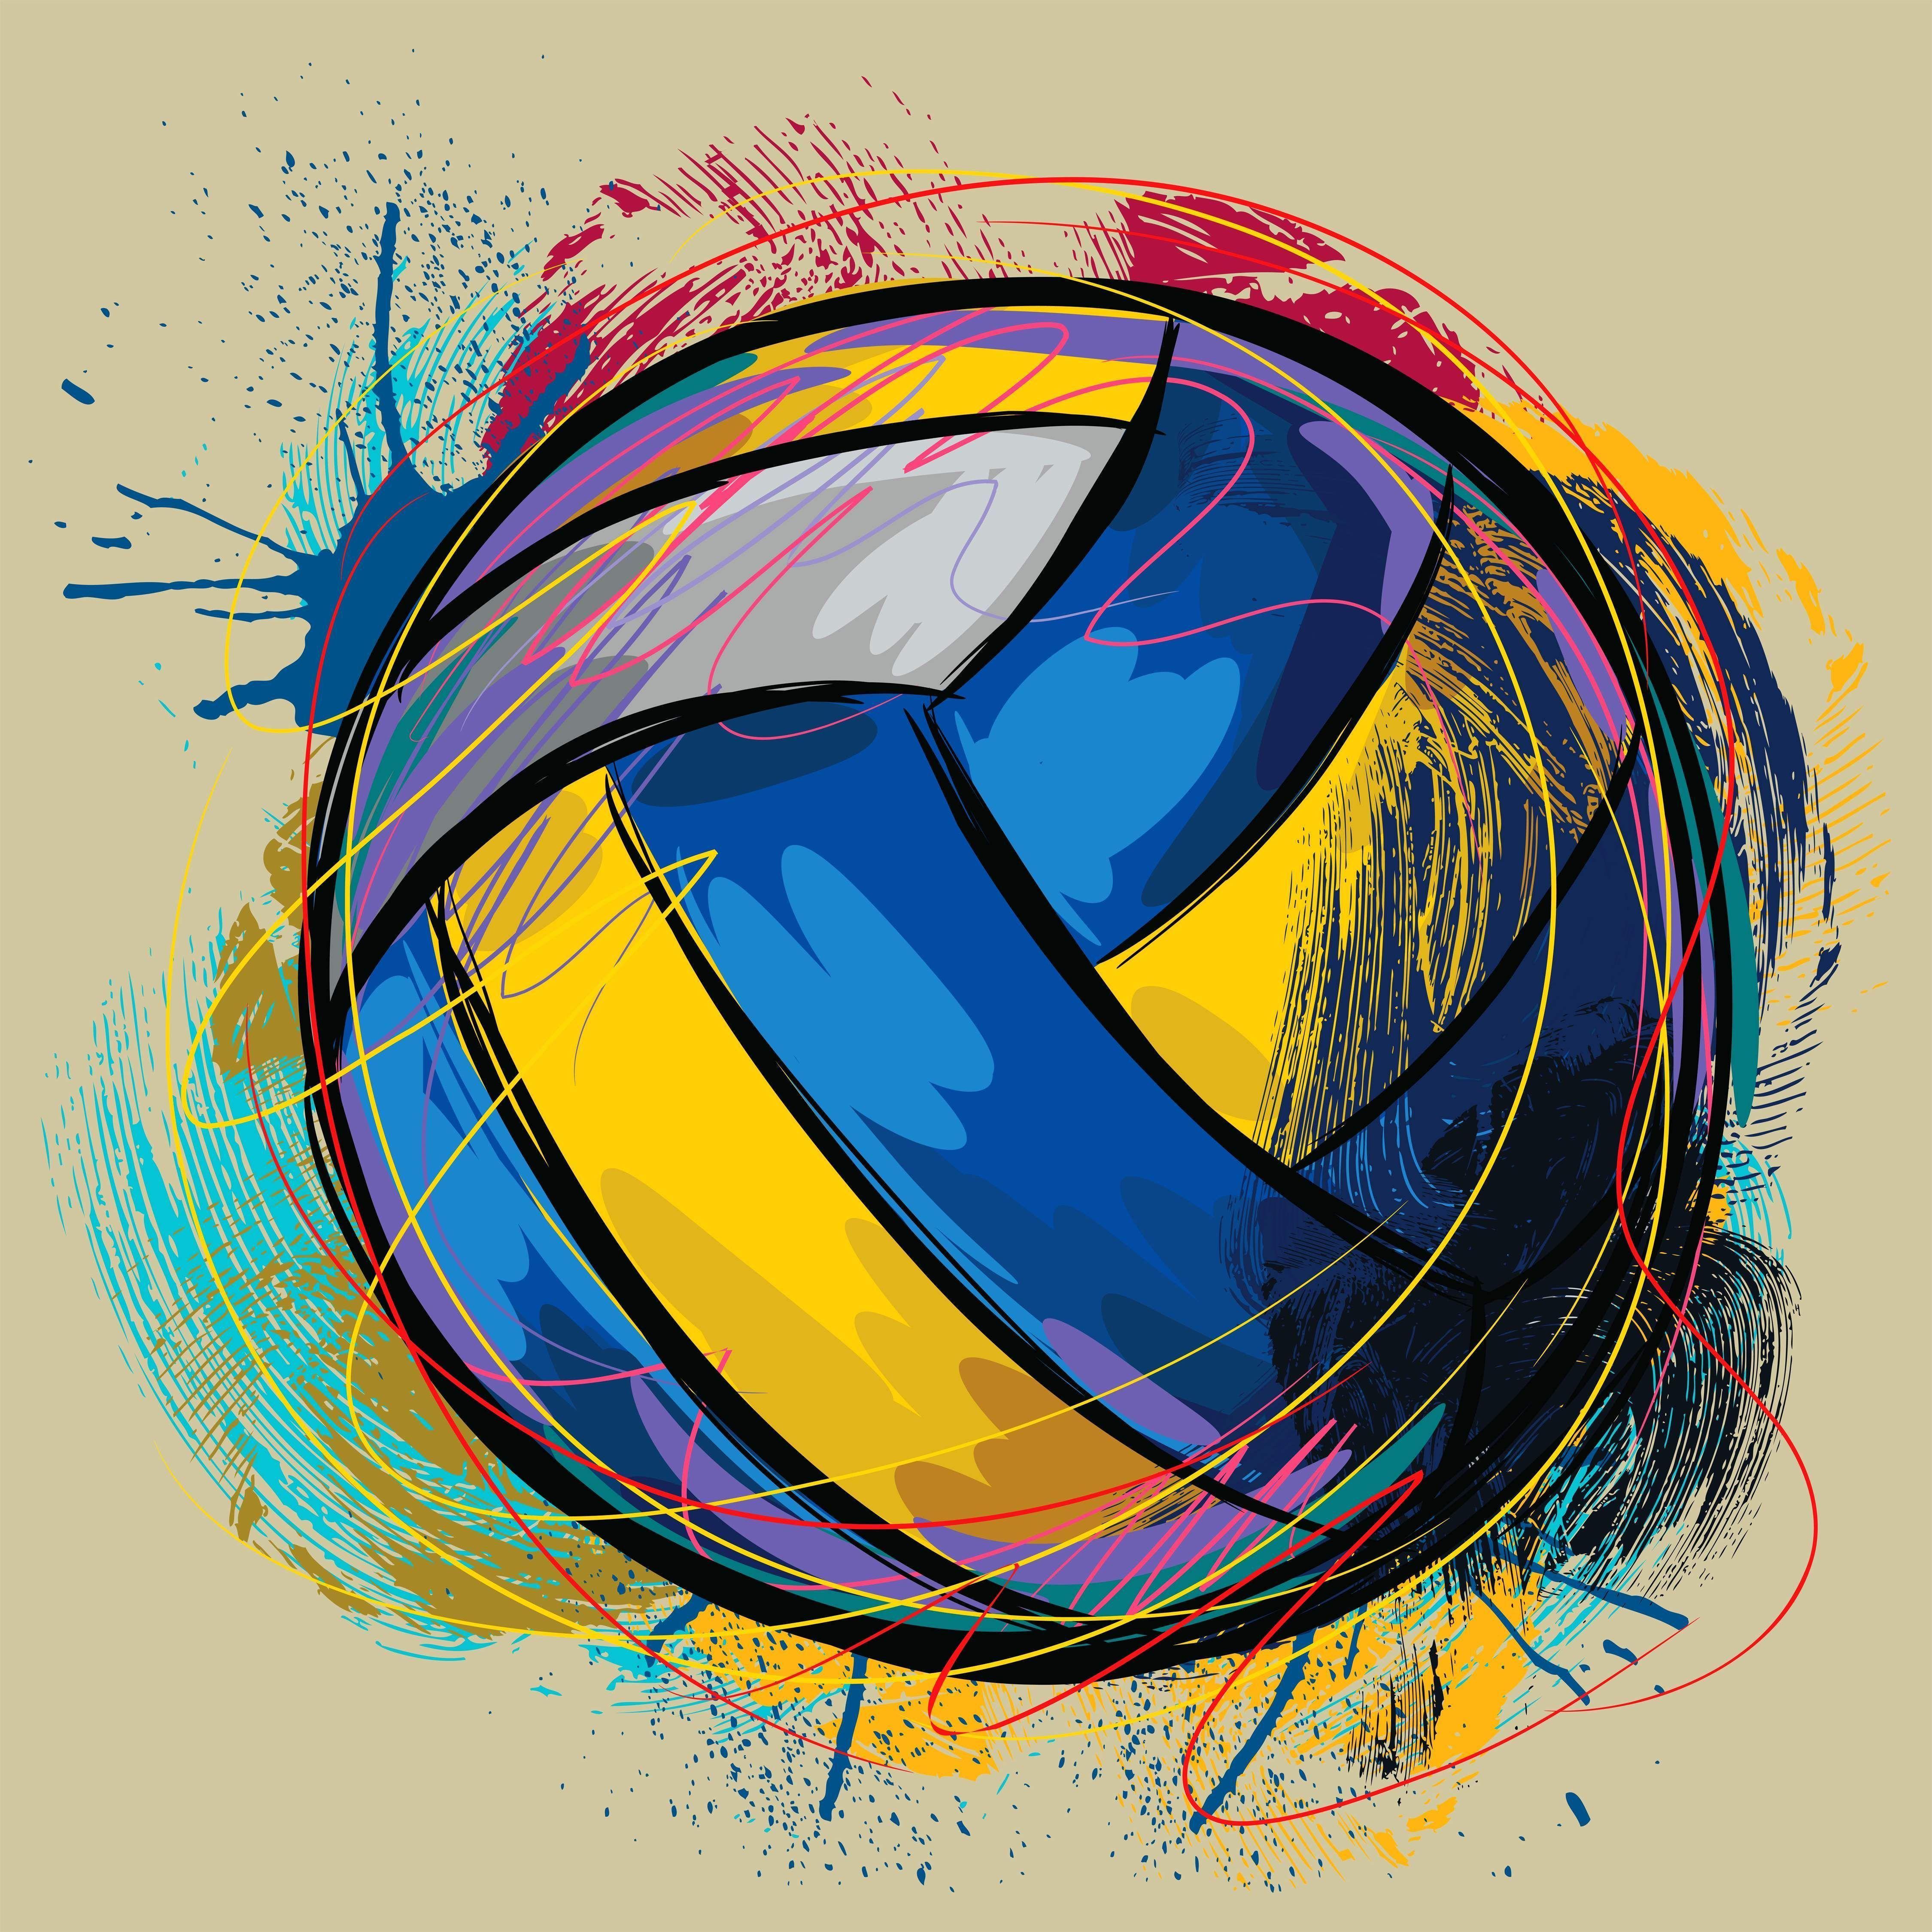 Free Volleyball Vector Art - Download 54+ Volleyball Icons & Graphics -  Pixabay